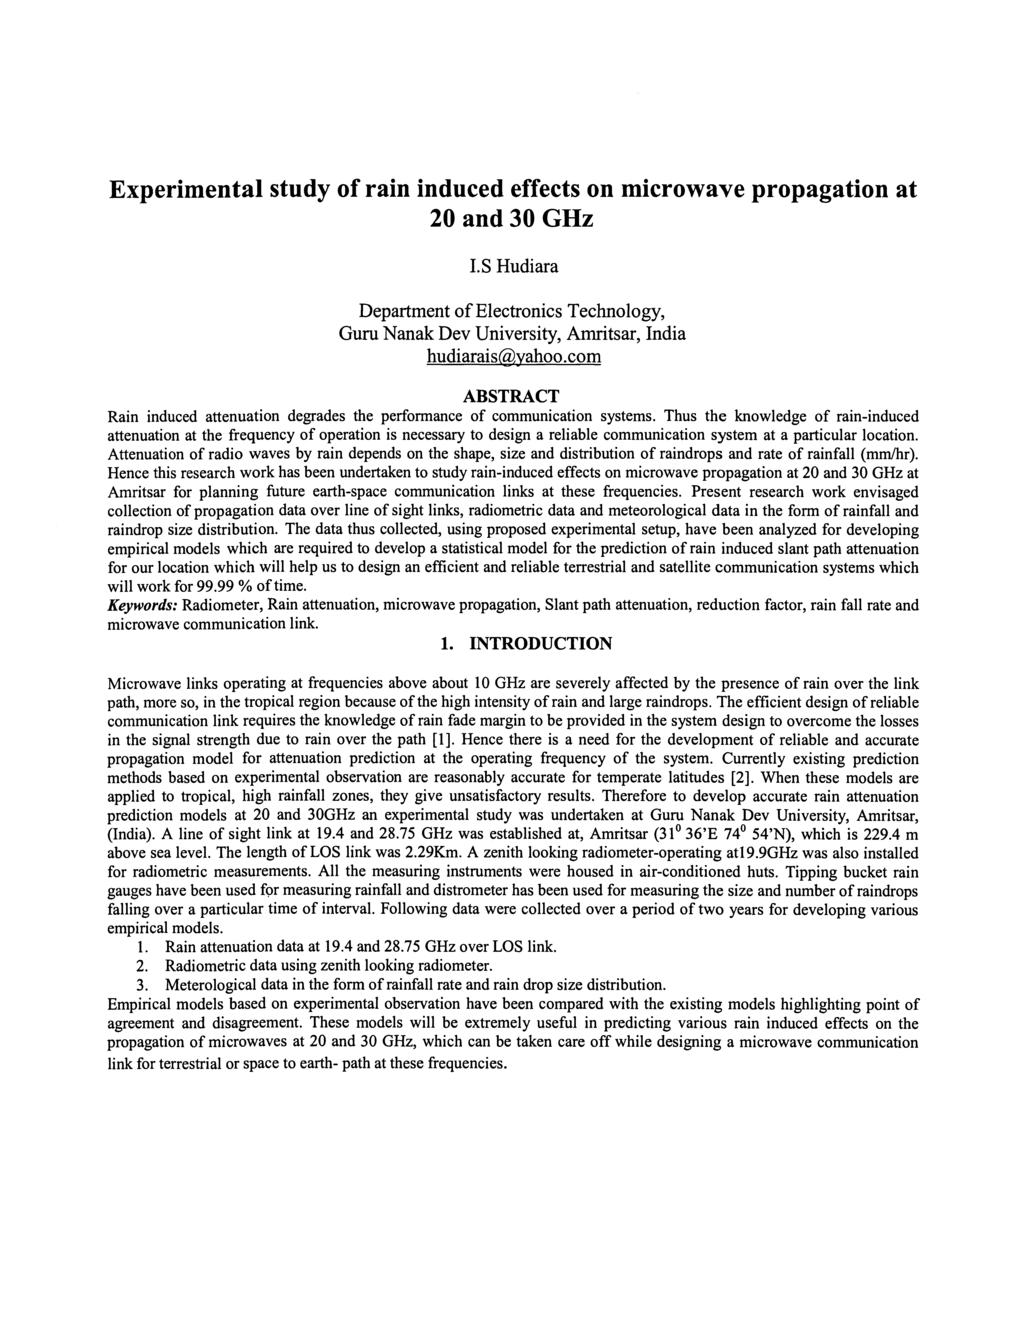 Invited Paper Experimental study of rain induced effects on microwave propagation at 2 and 3 GHz LS Hudiara Department of Electronics Technology, Guru Nanak Dev University, Amritsar, India